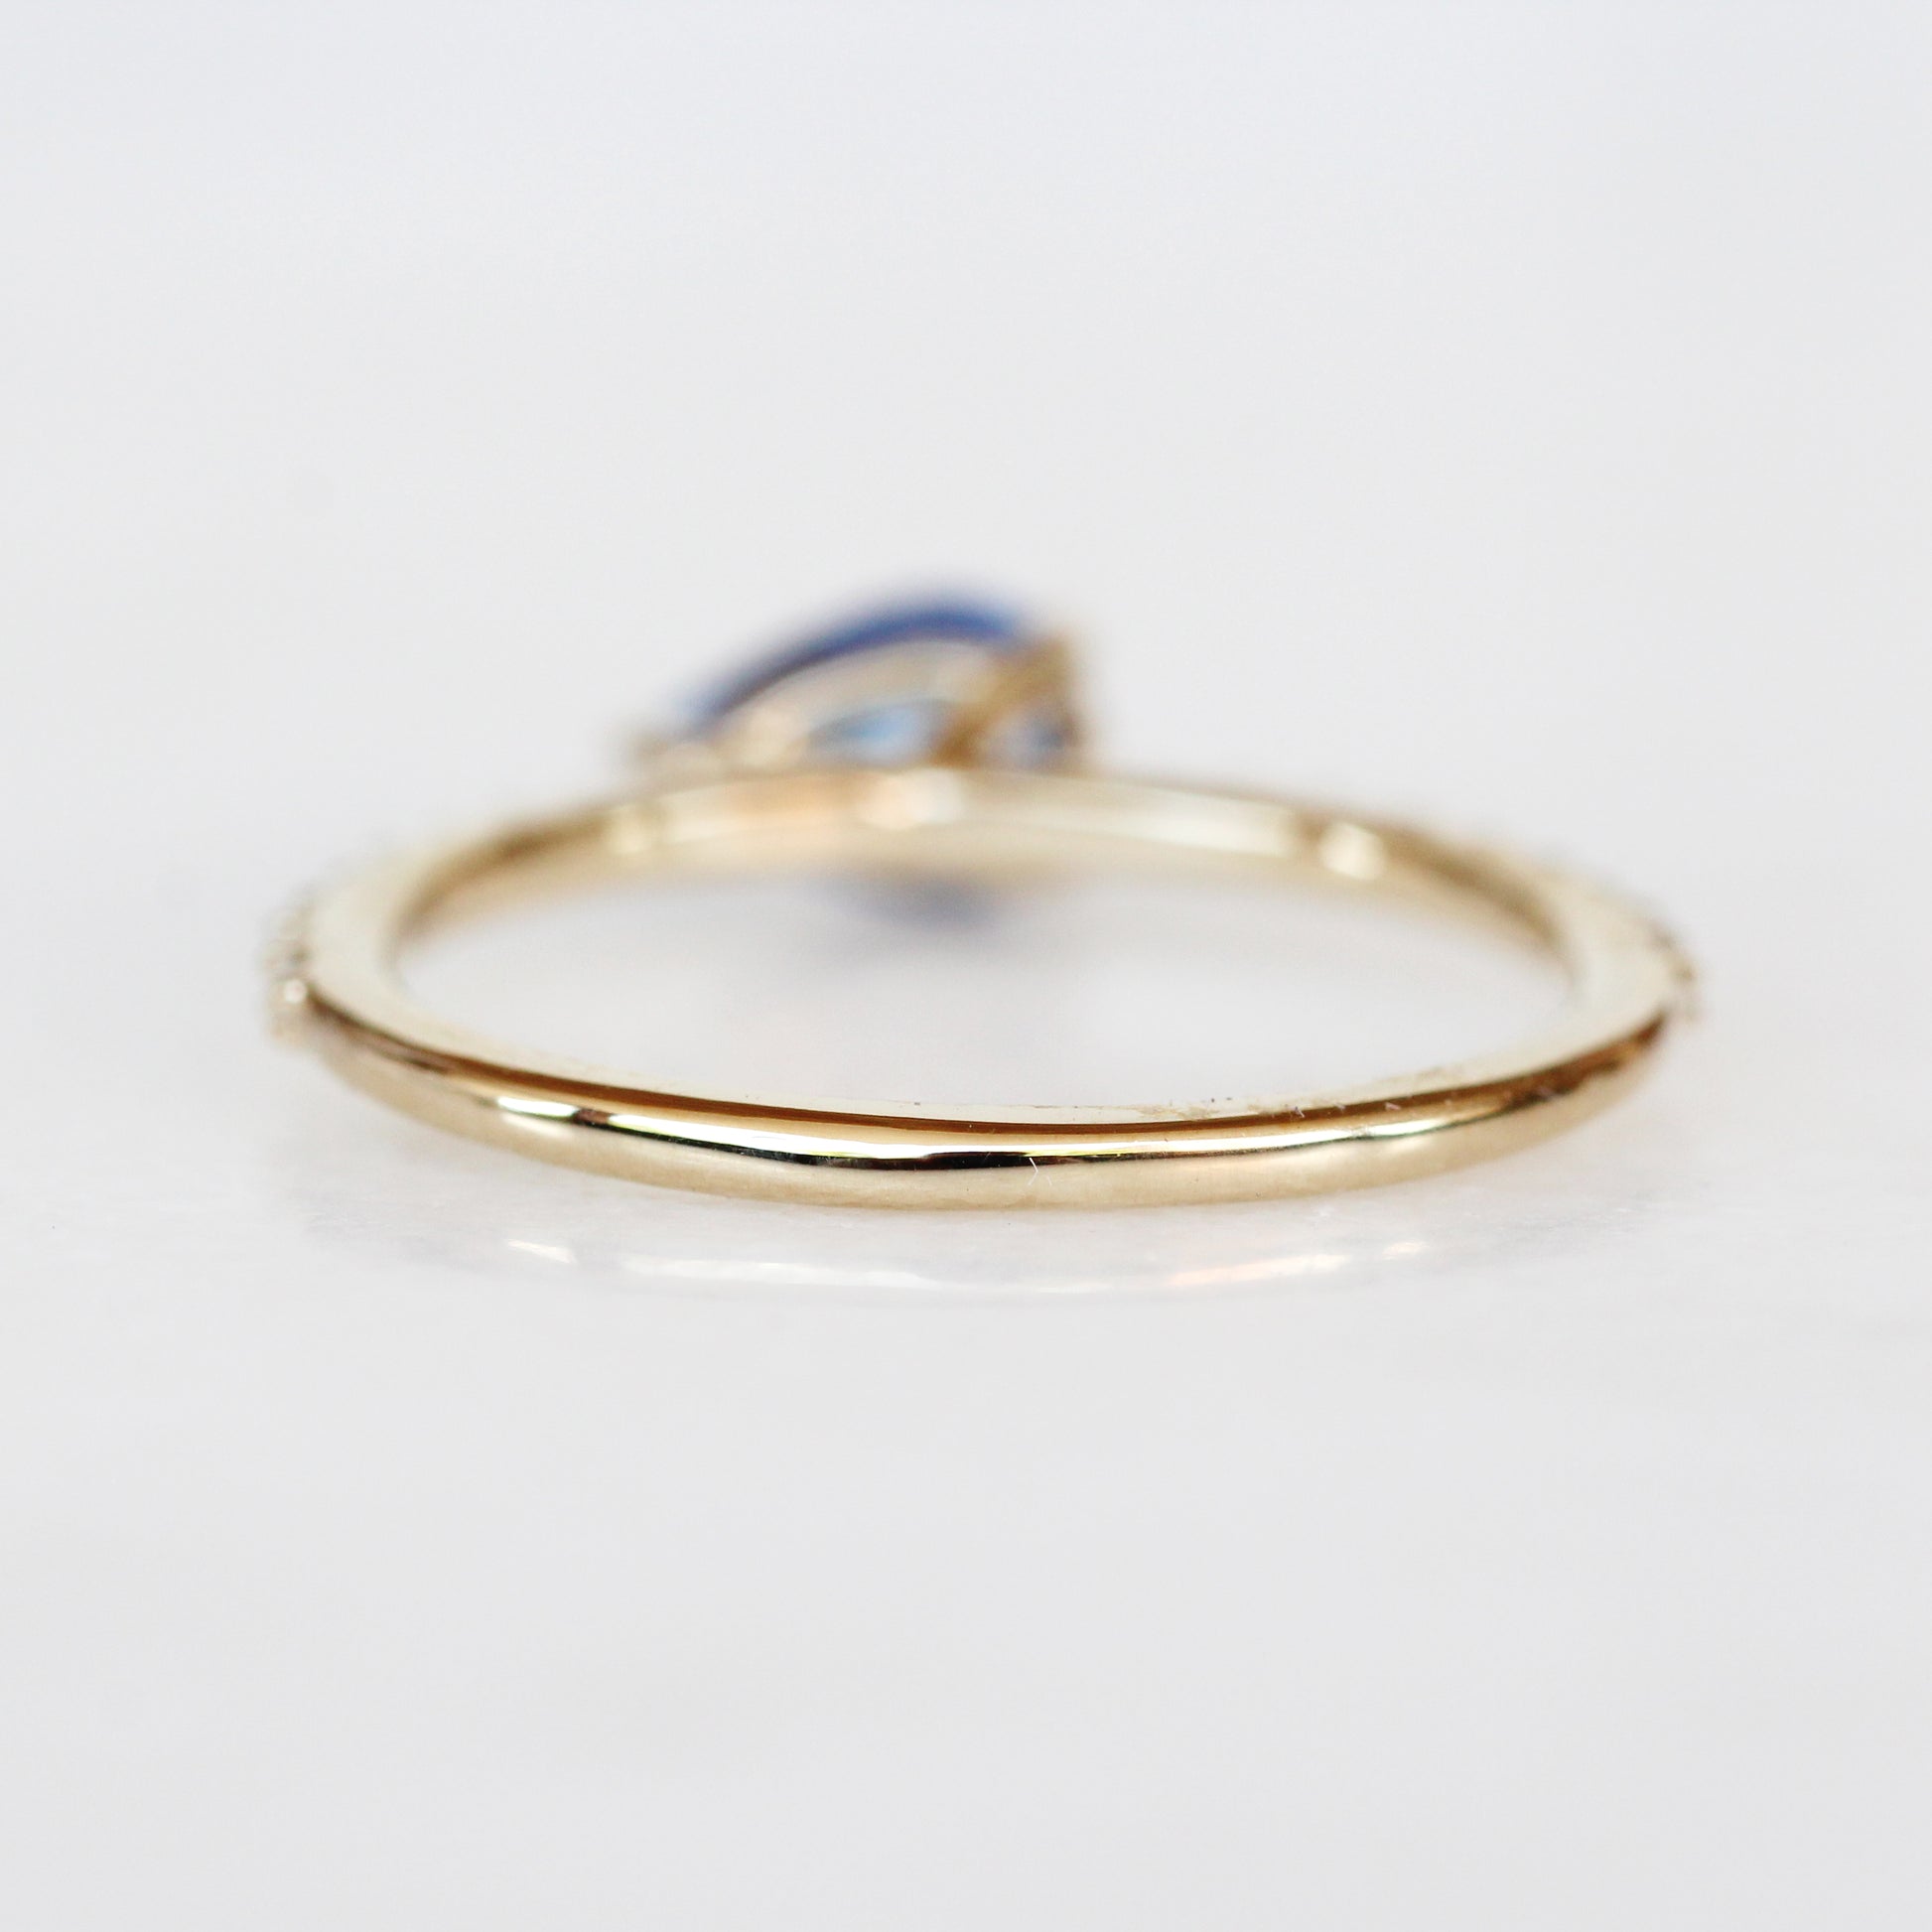 Raine Ring with a Pear Sapphire in 10k Yellow Gold - Ready to Size and Ship - Midwinter Co. Alternative Bridal Rings and Modern Fine Jewelry